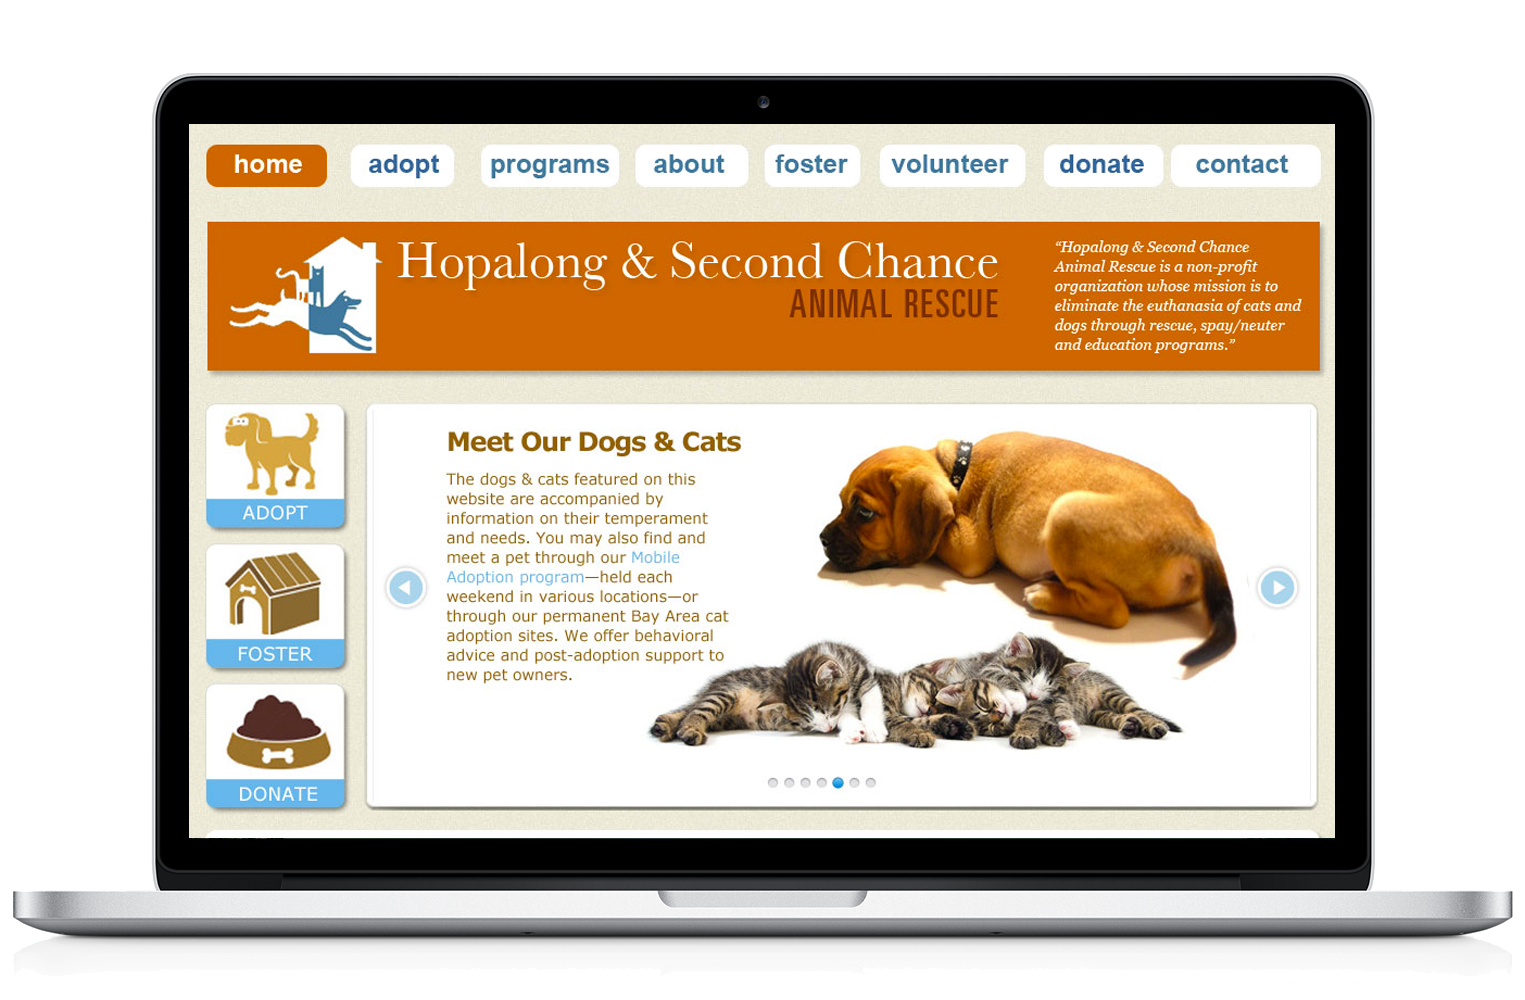 hopalong and second chance animal rescue